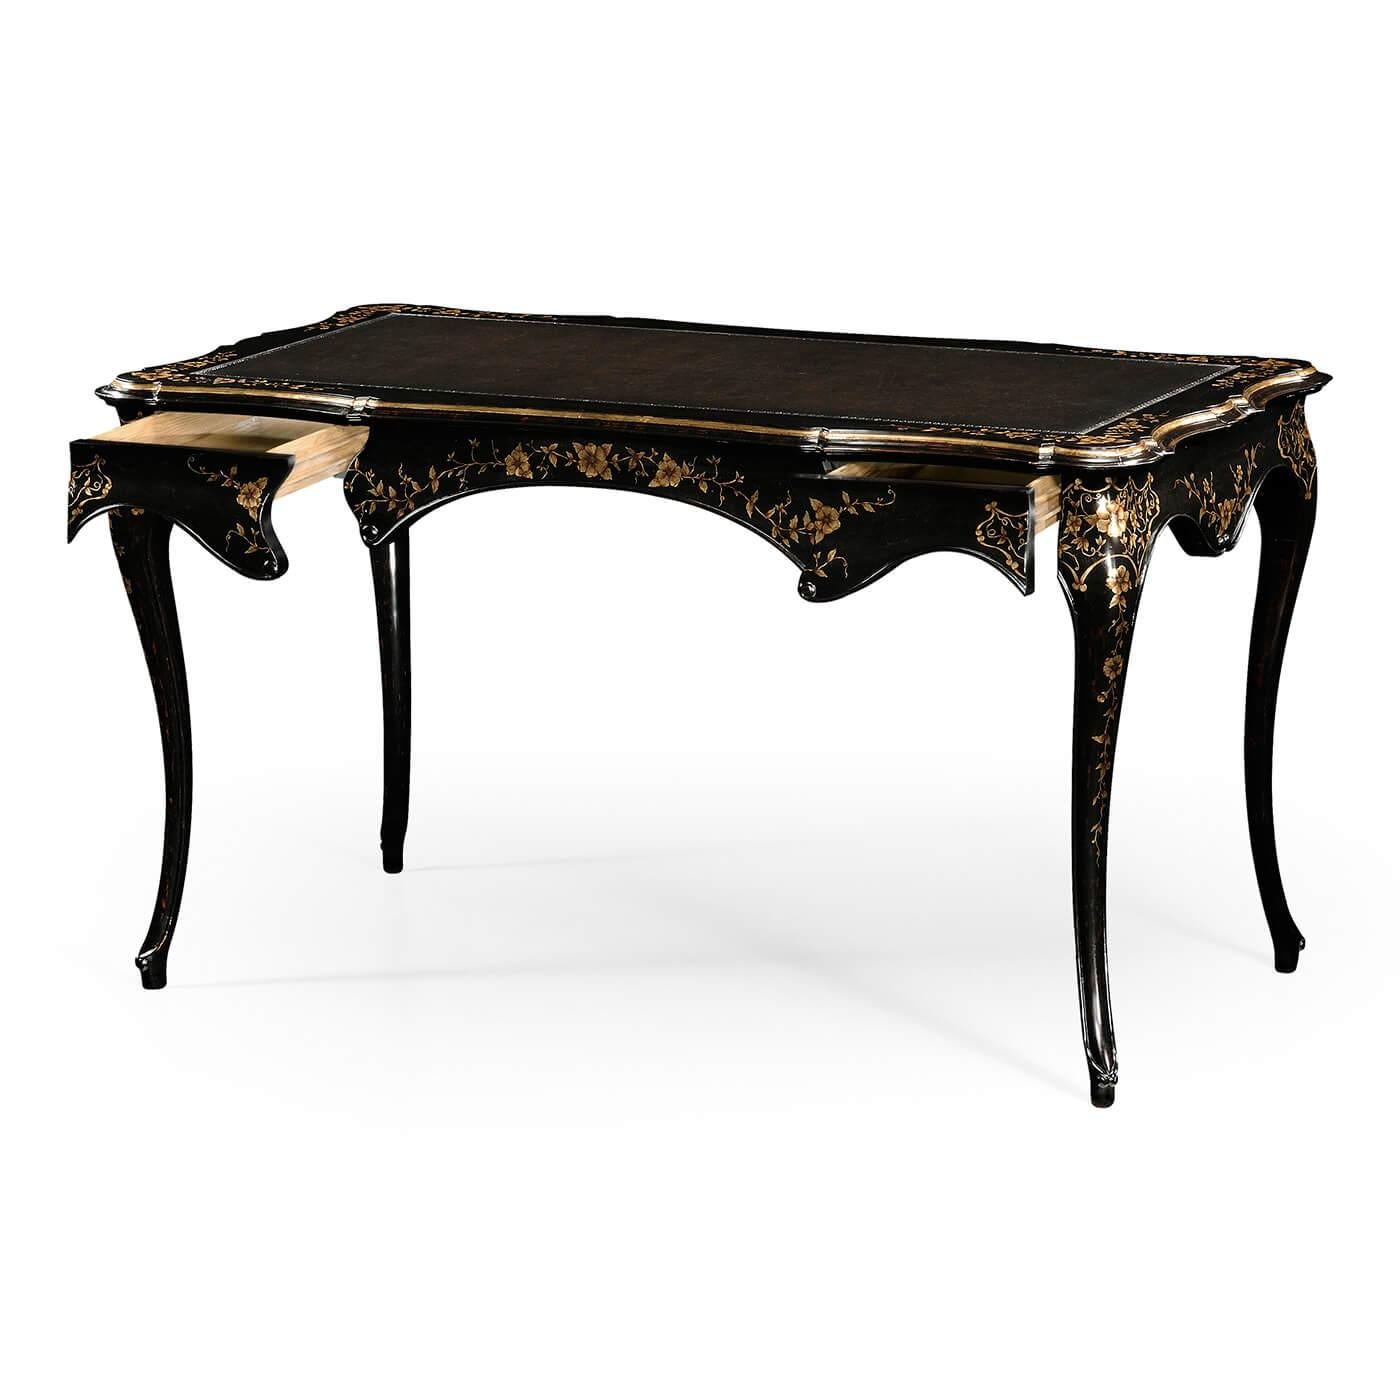 Elegant English Rococo black painted desk with antiqued dark leather inlaid writing surface and a profusion of hand painted gilt floral detail on apron and legs. 

Dimensions: 54